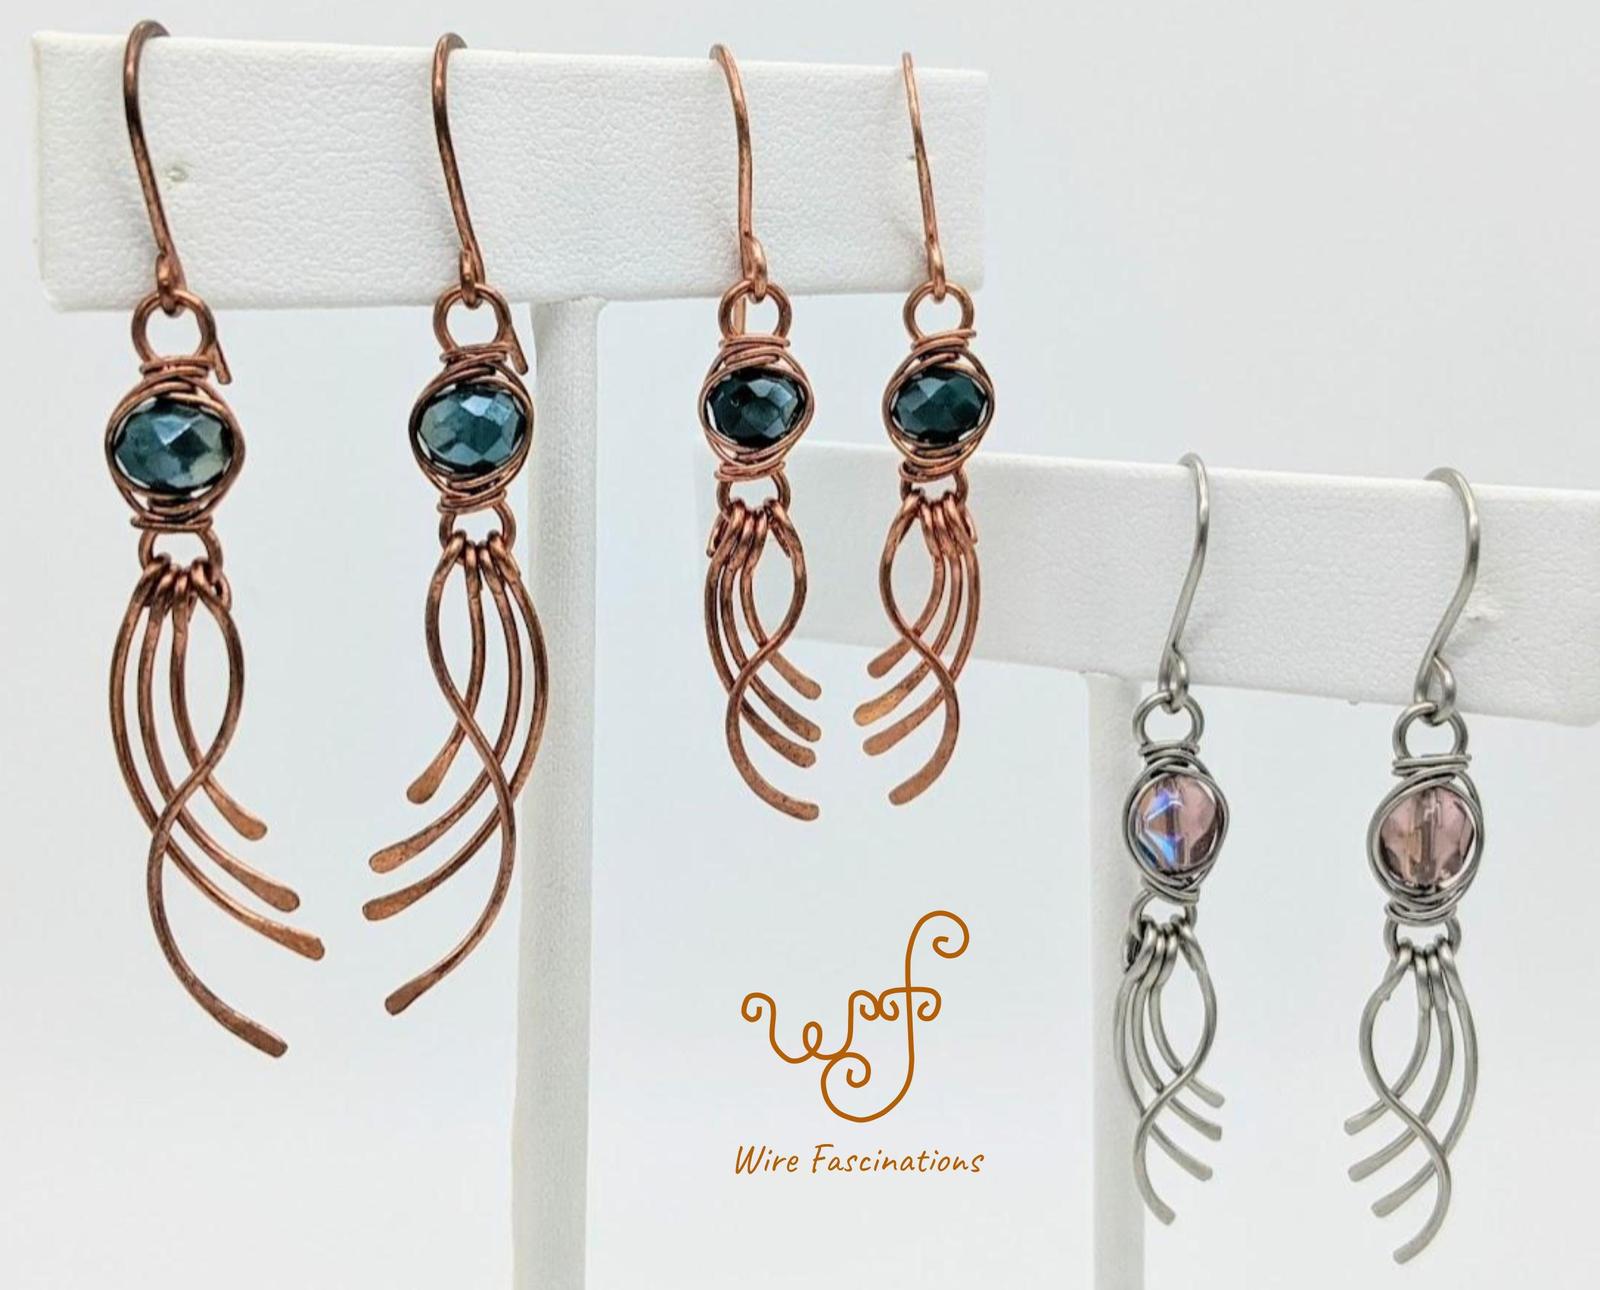 Handmade Copper Earrings Wire Wrapped Czech Glass with Curving Dangles